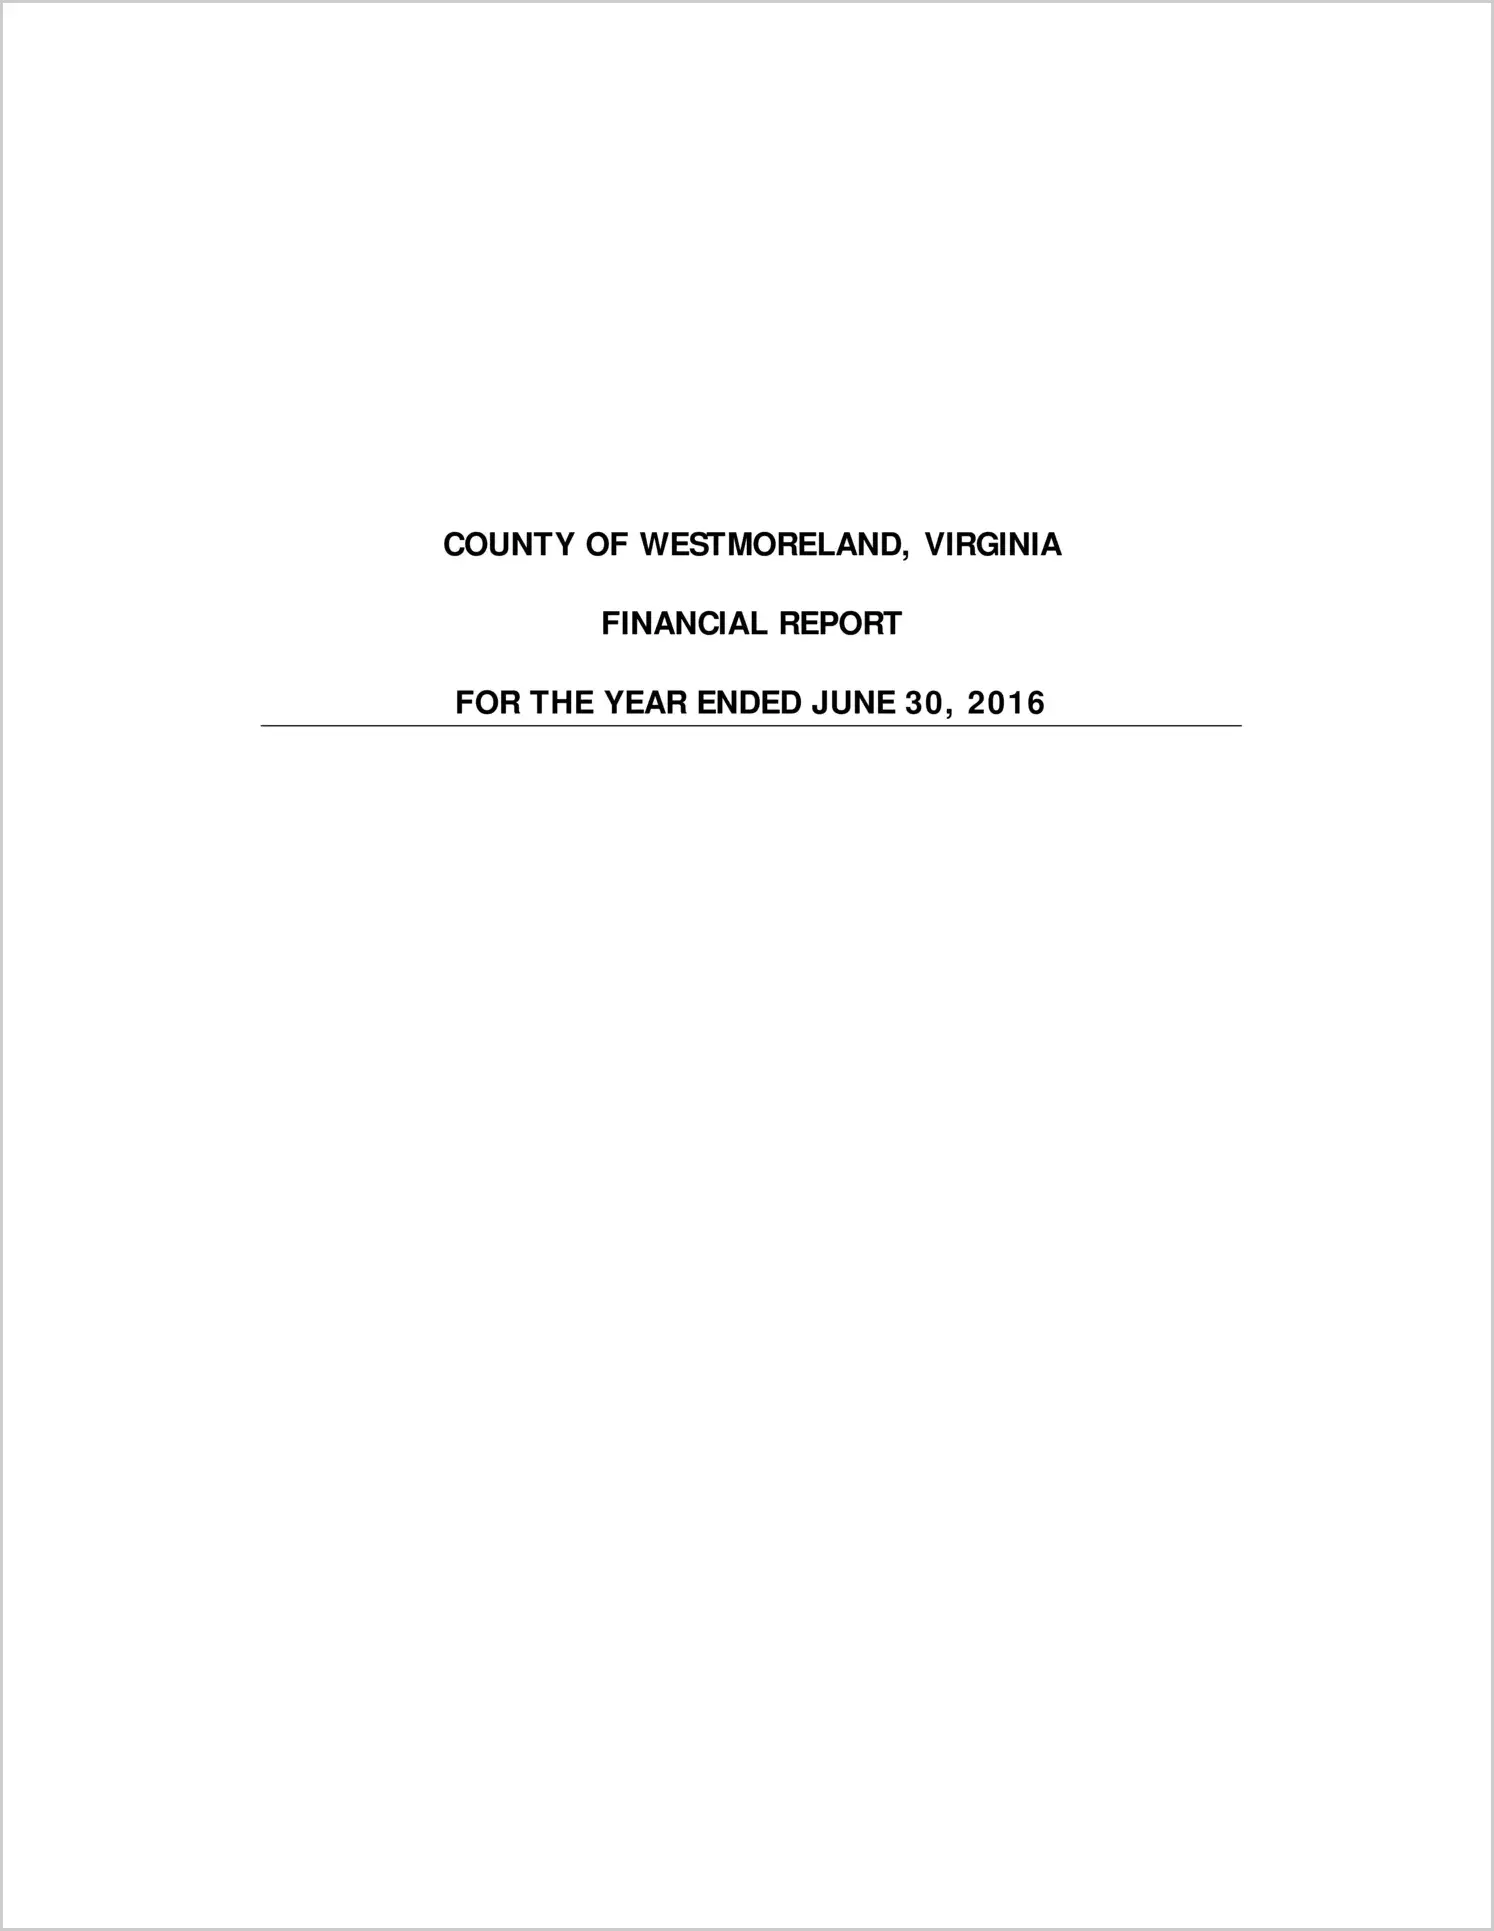 2016 Annual Financial Report for County of Westmoreland